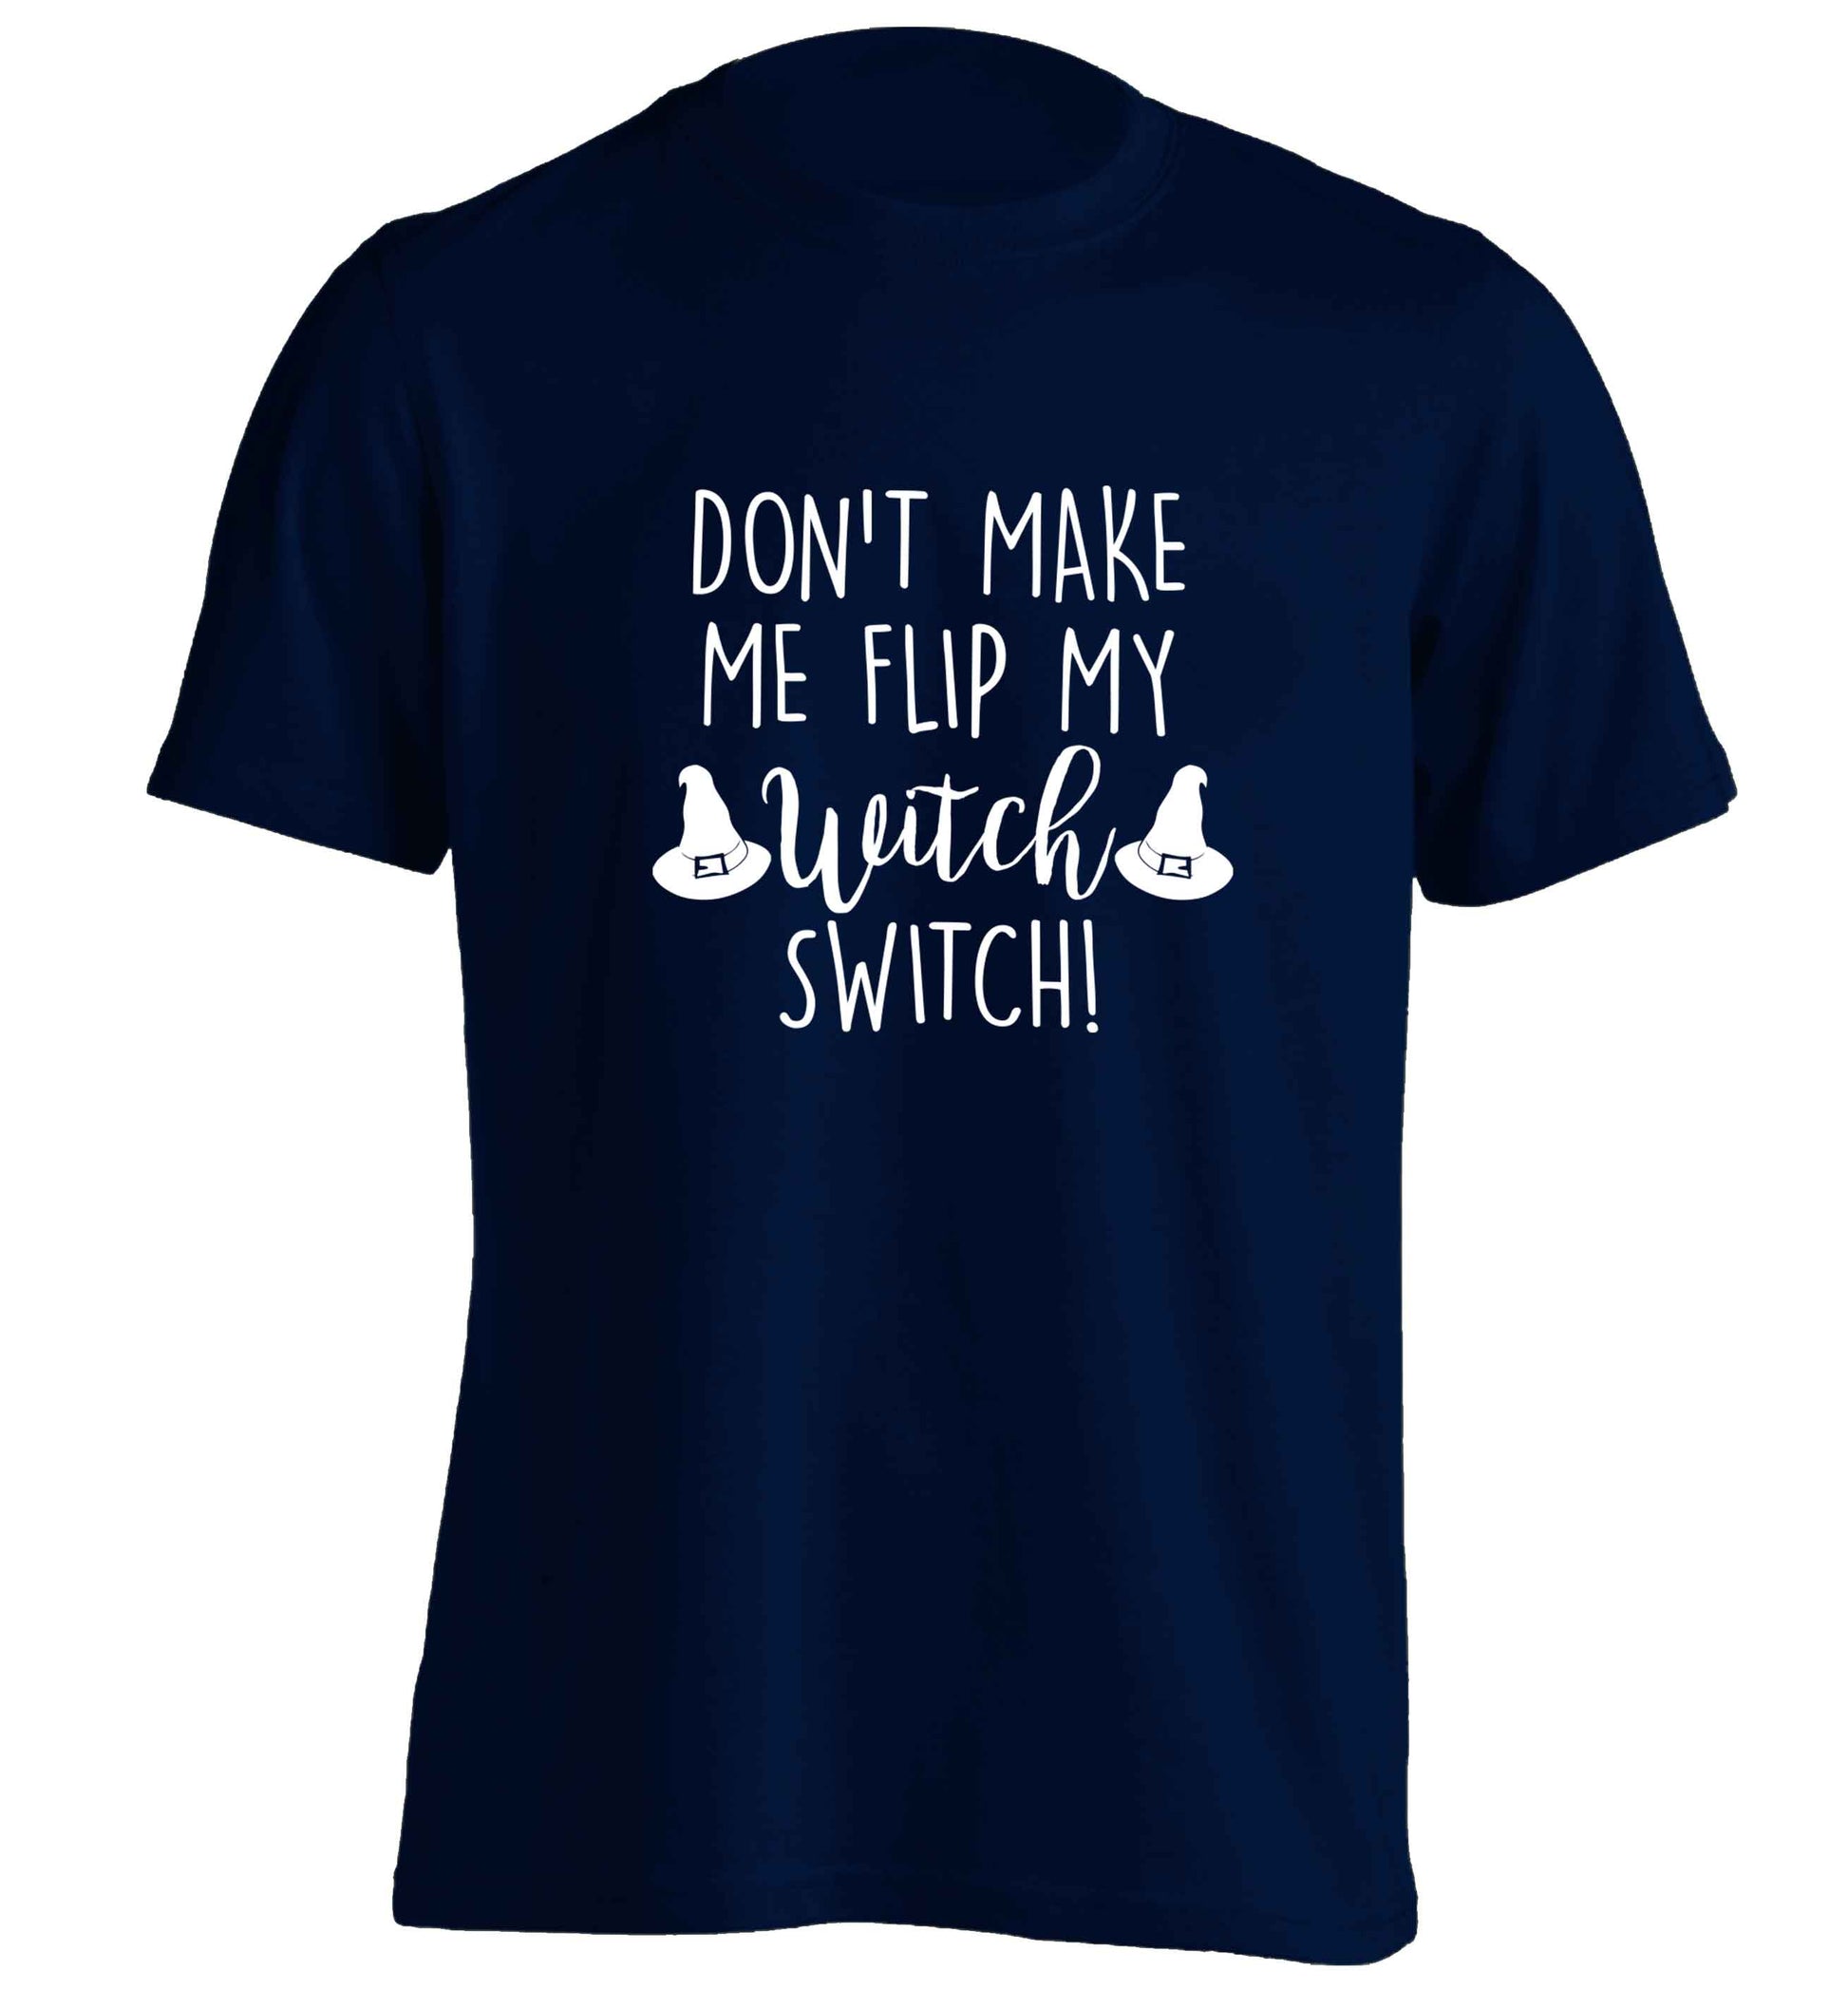 Don't make me flip my witch switch adults unisex navy Tshirt 2XL